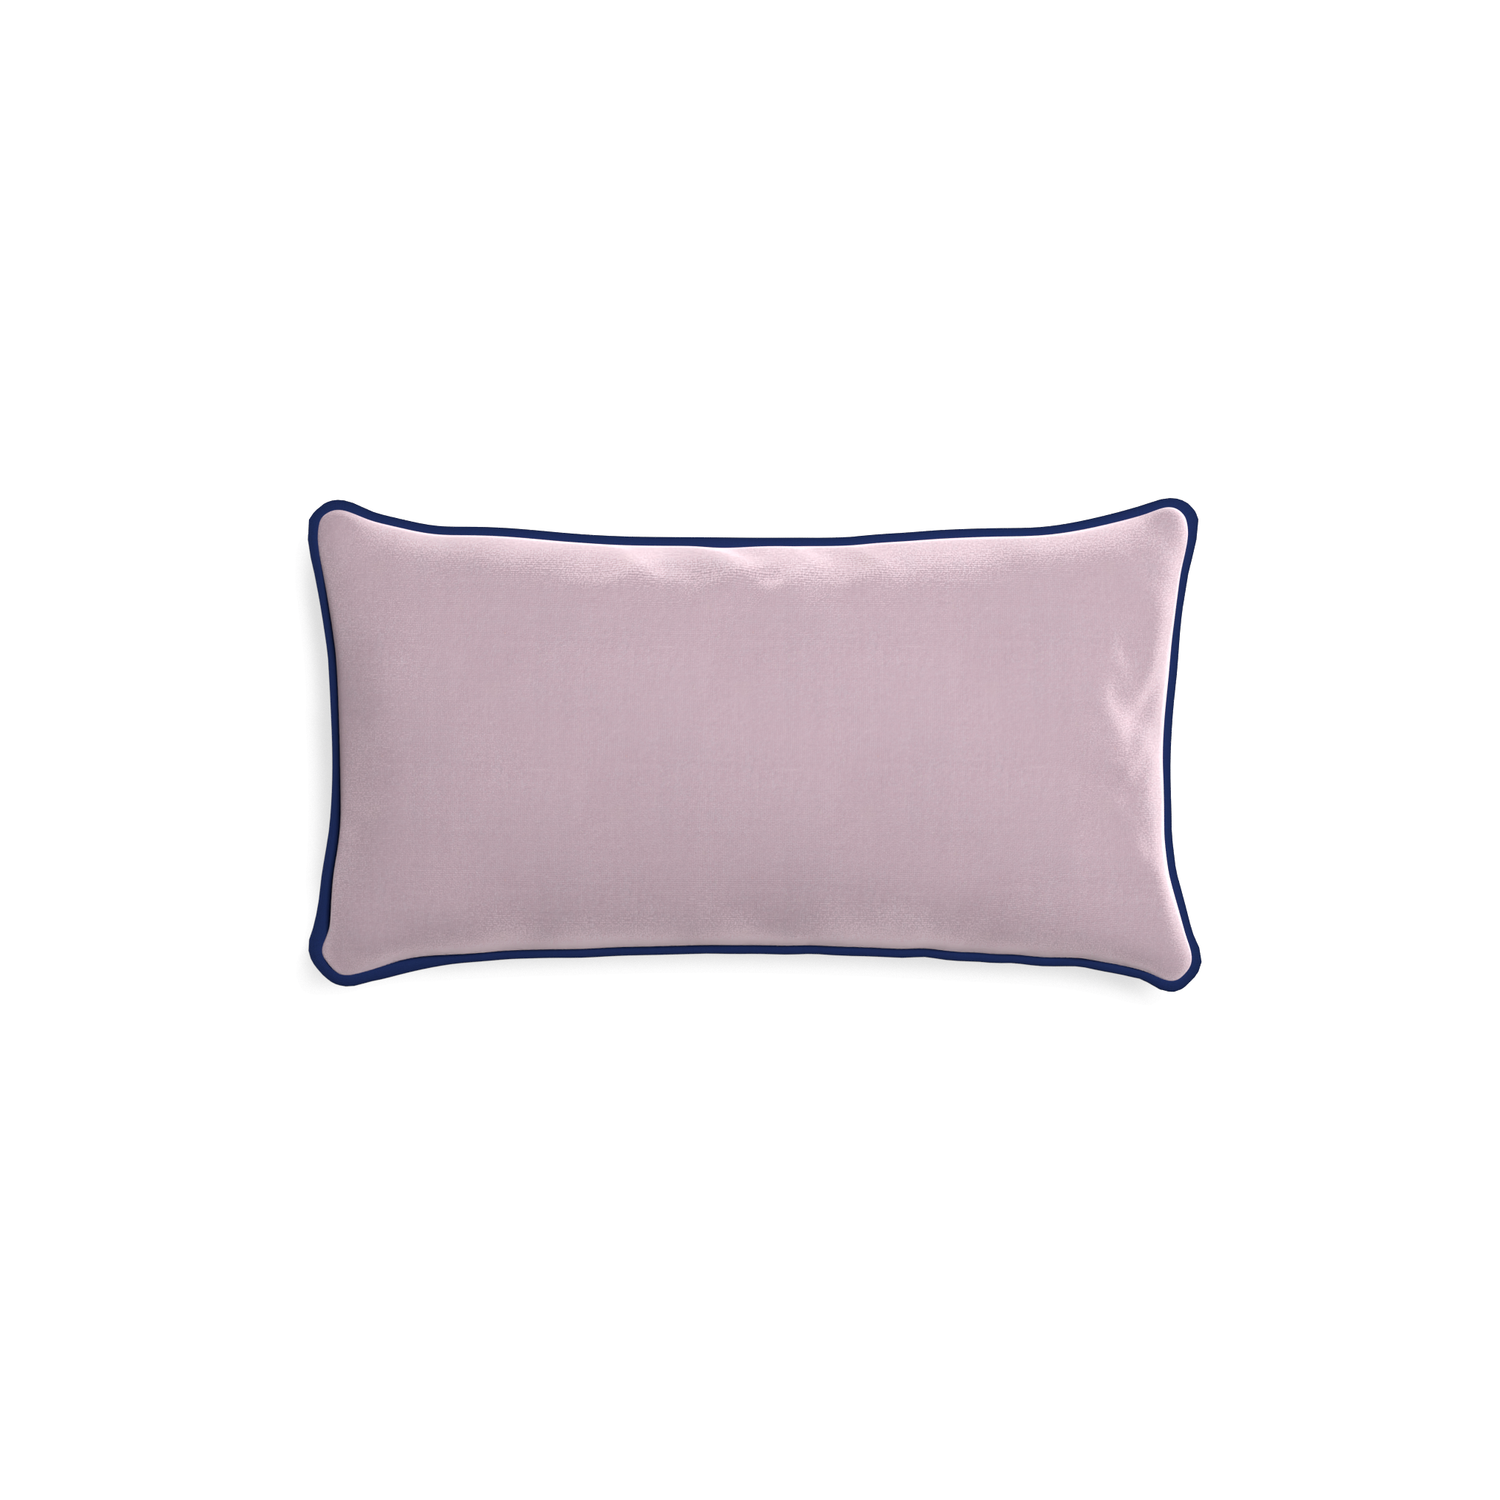 rectangle lilac velvet pillow with navy blue piping